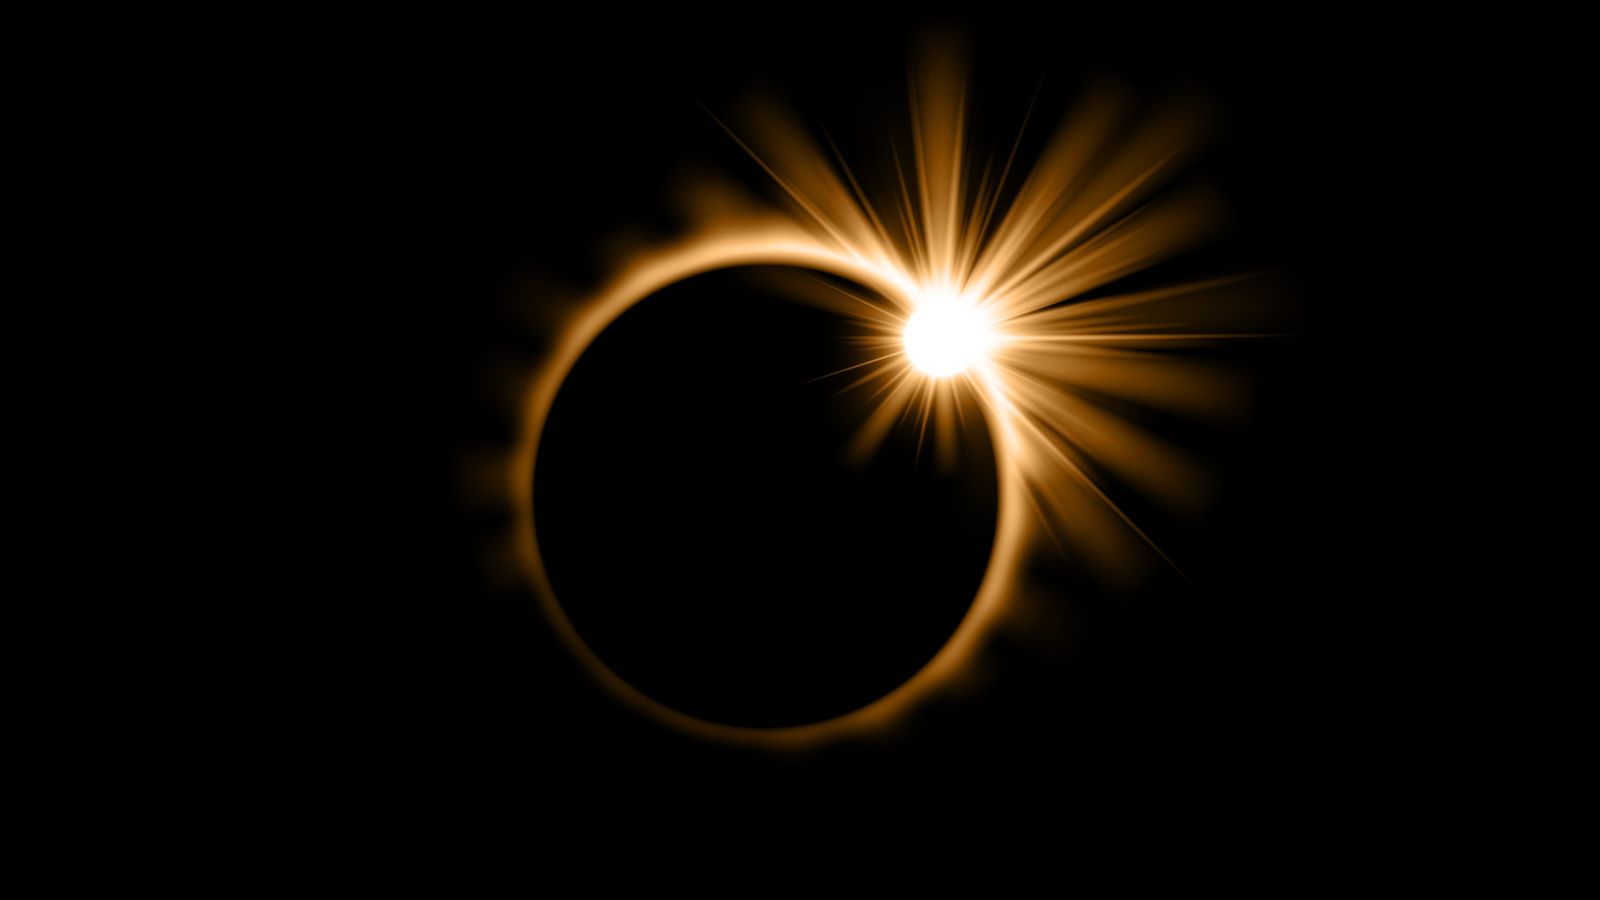 How to Look at the Solar Eclipse Safely, According to an Ophthalmologist